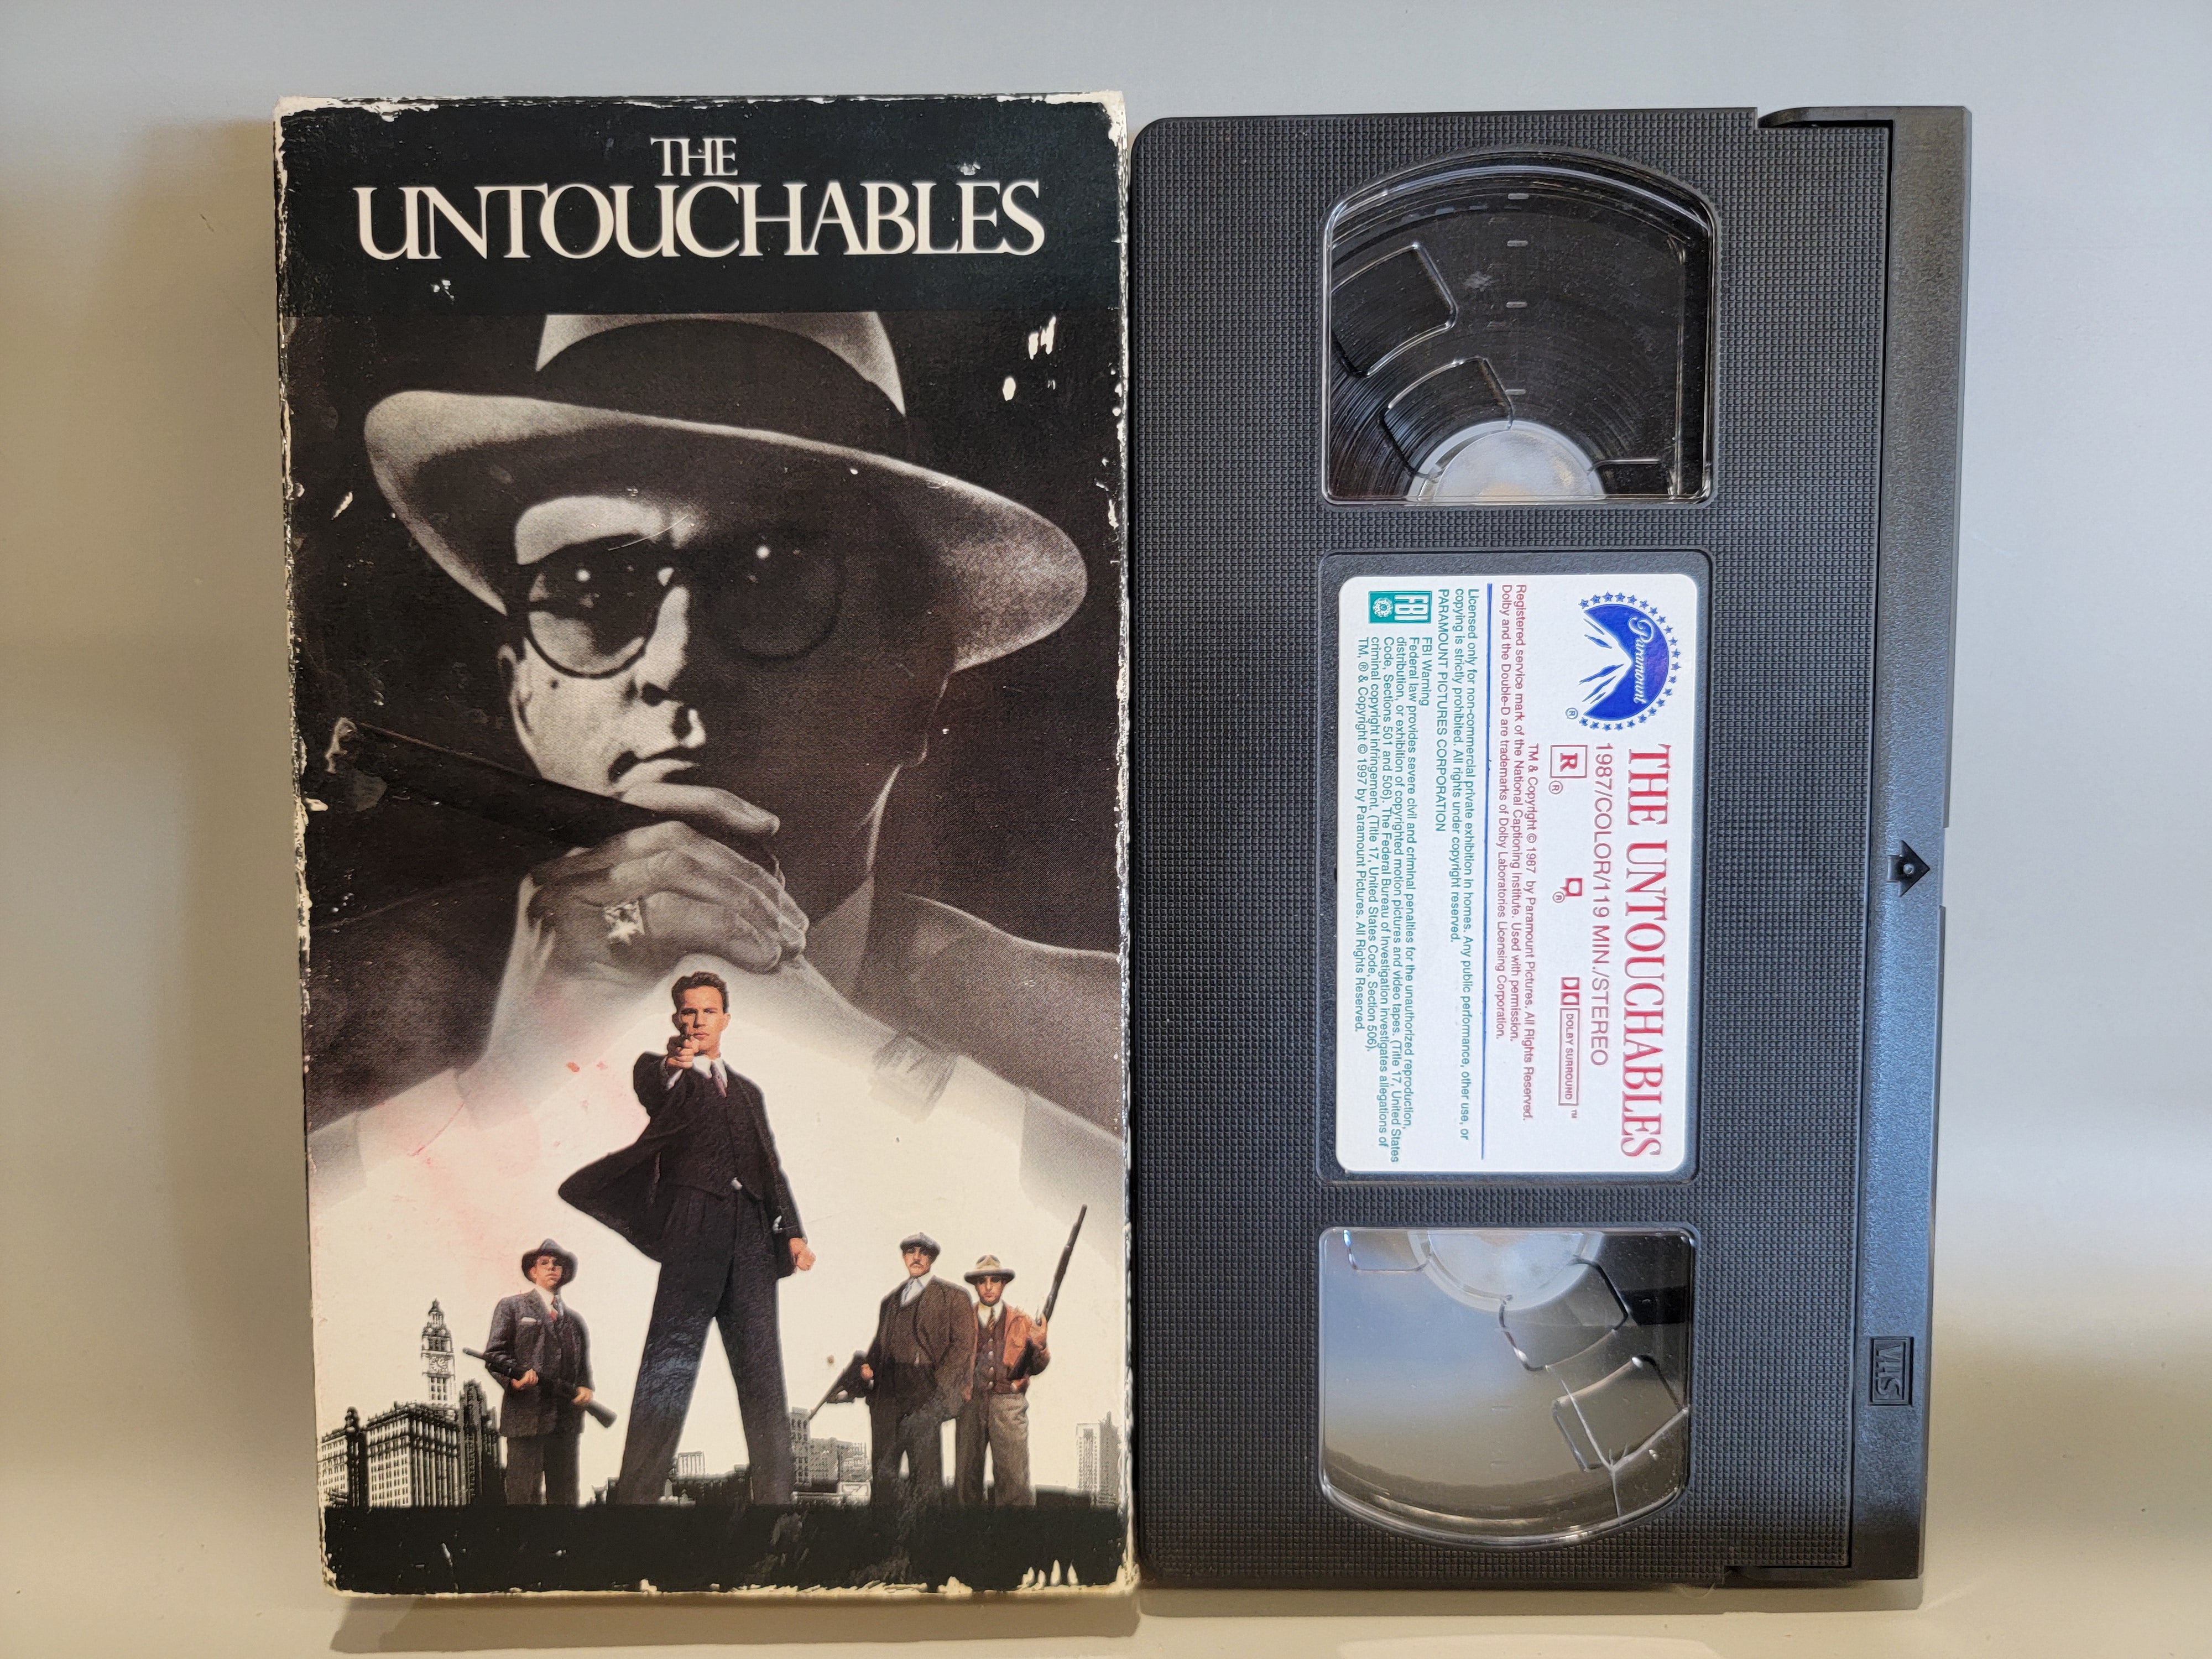 THE UNTOUCHABLES VHS [USED]